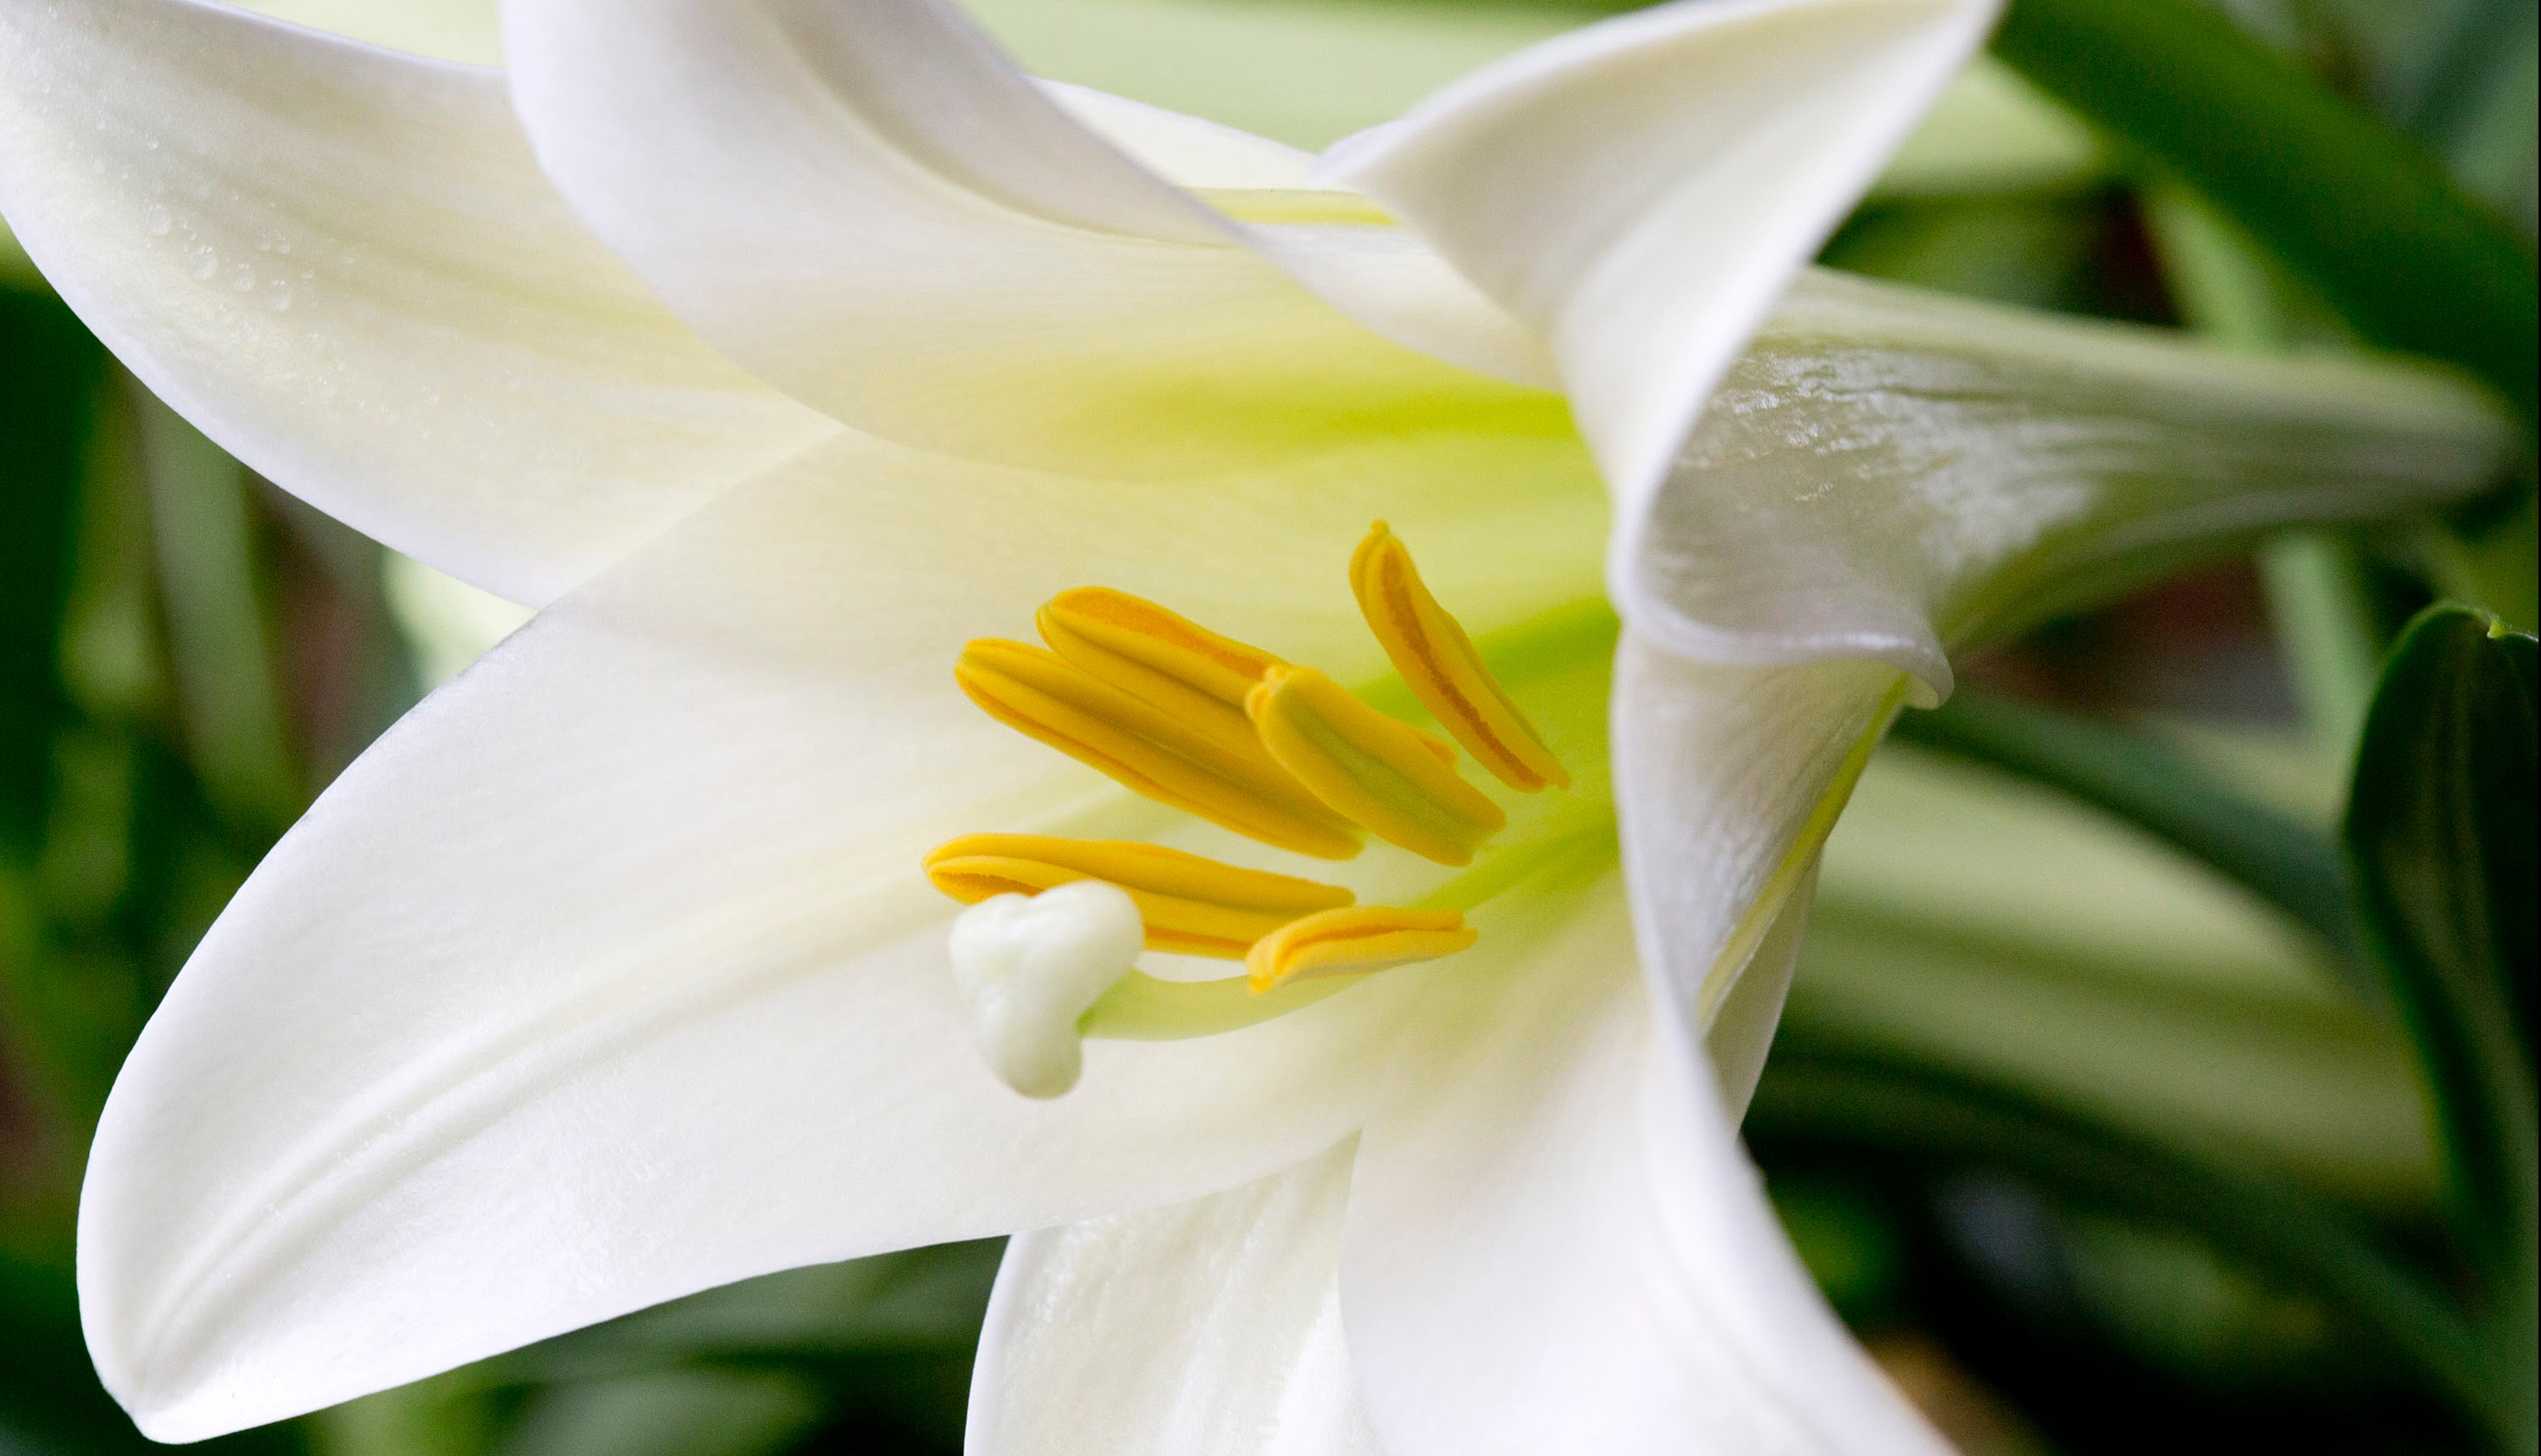 Caring for your Easter Lilies - YouTube